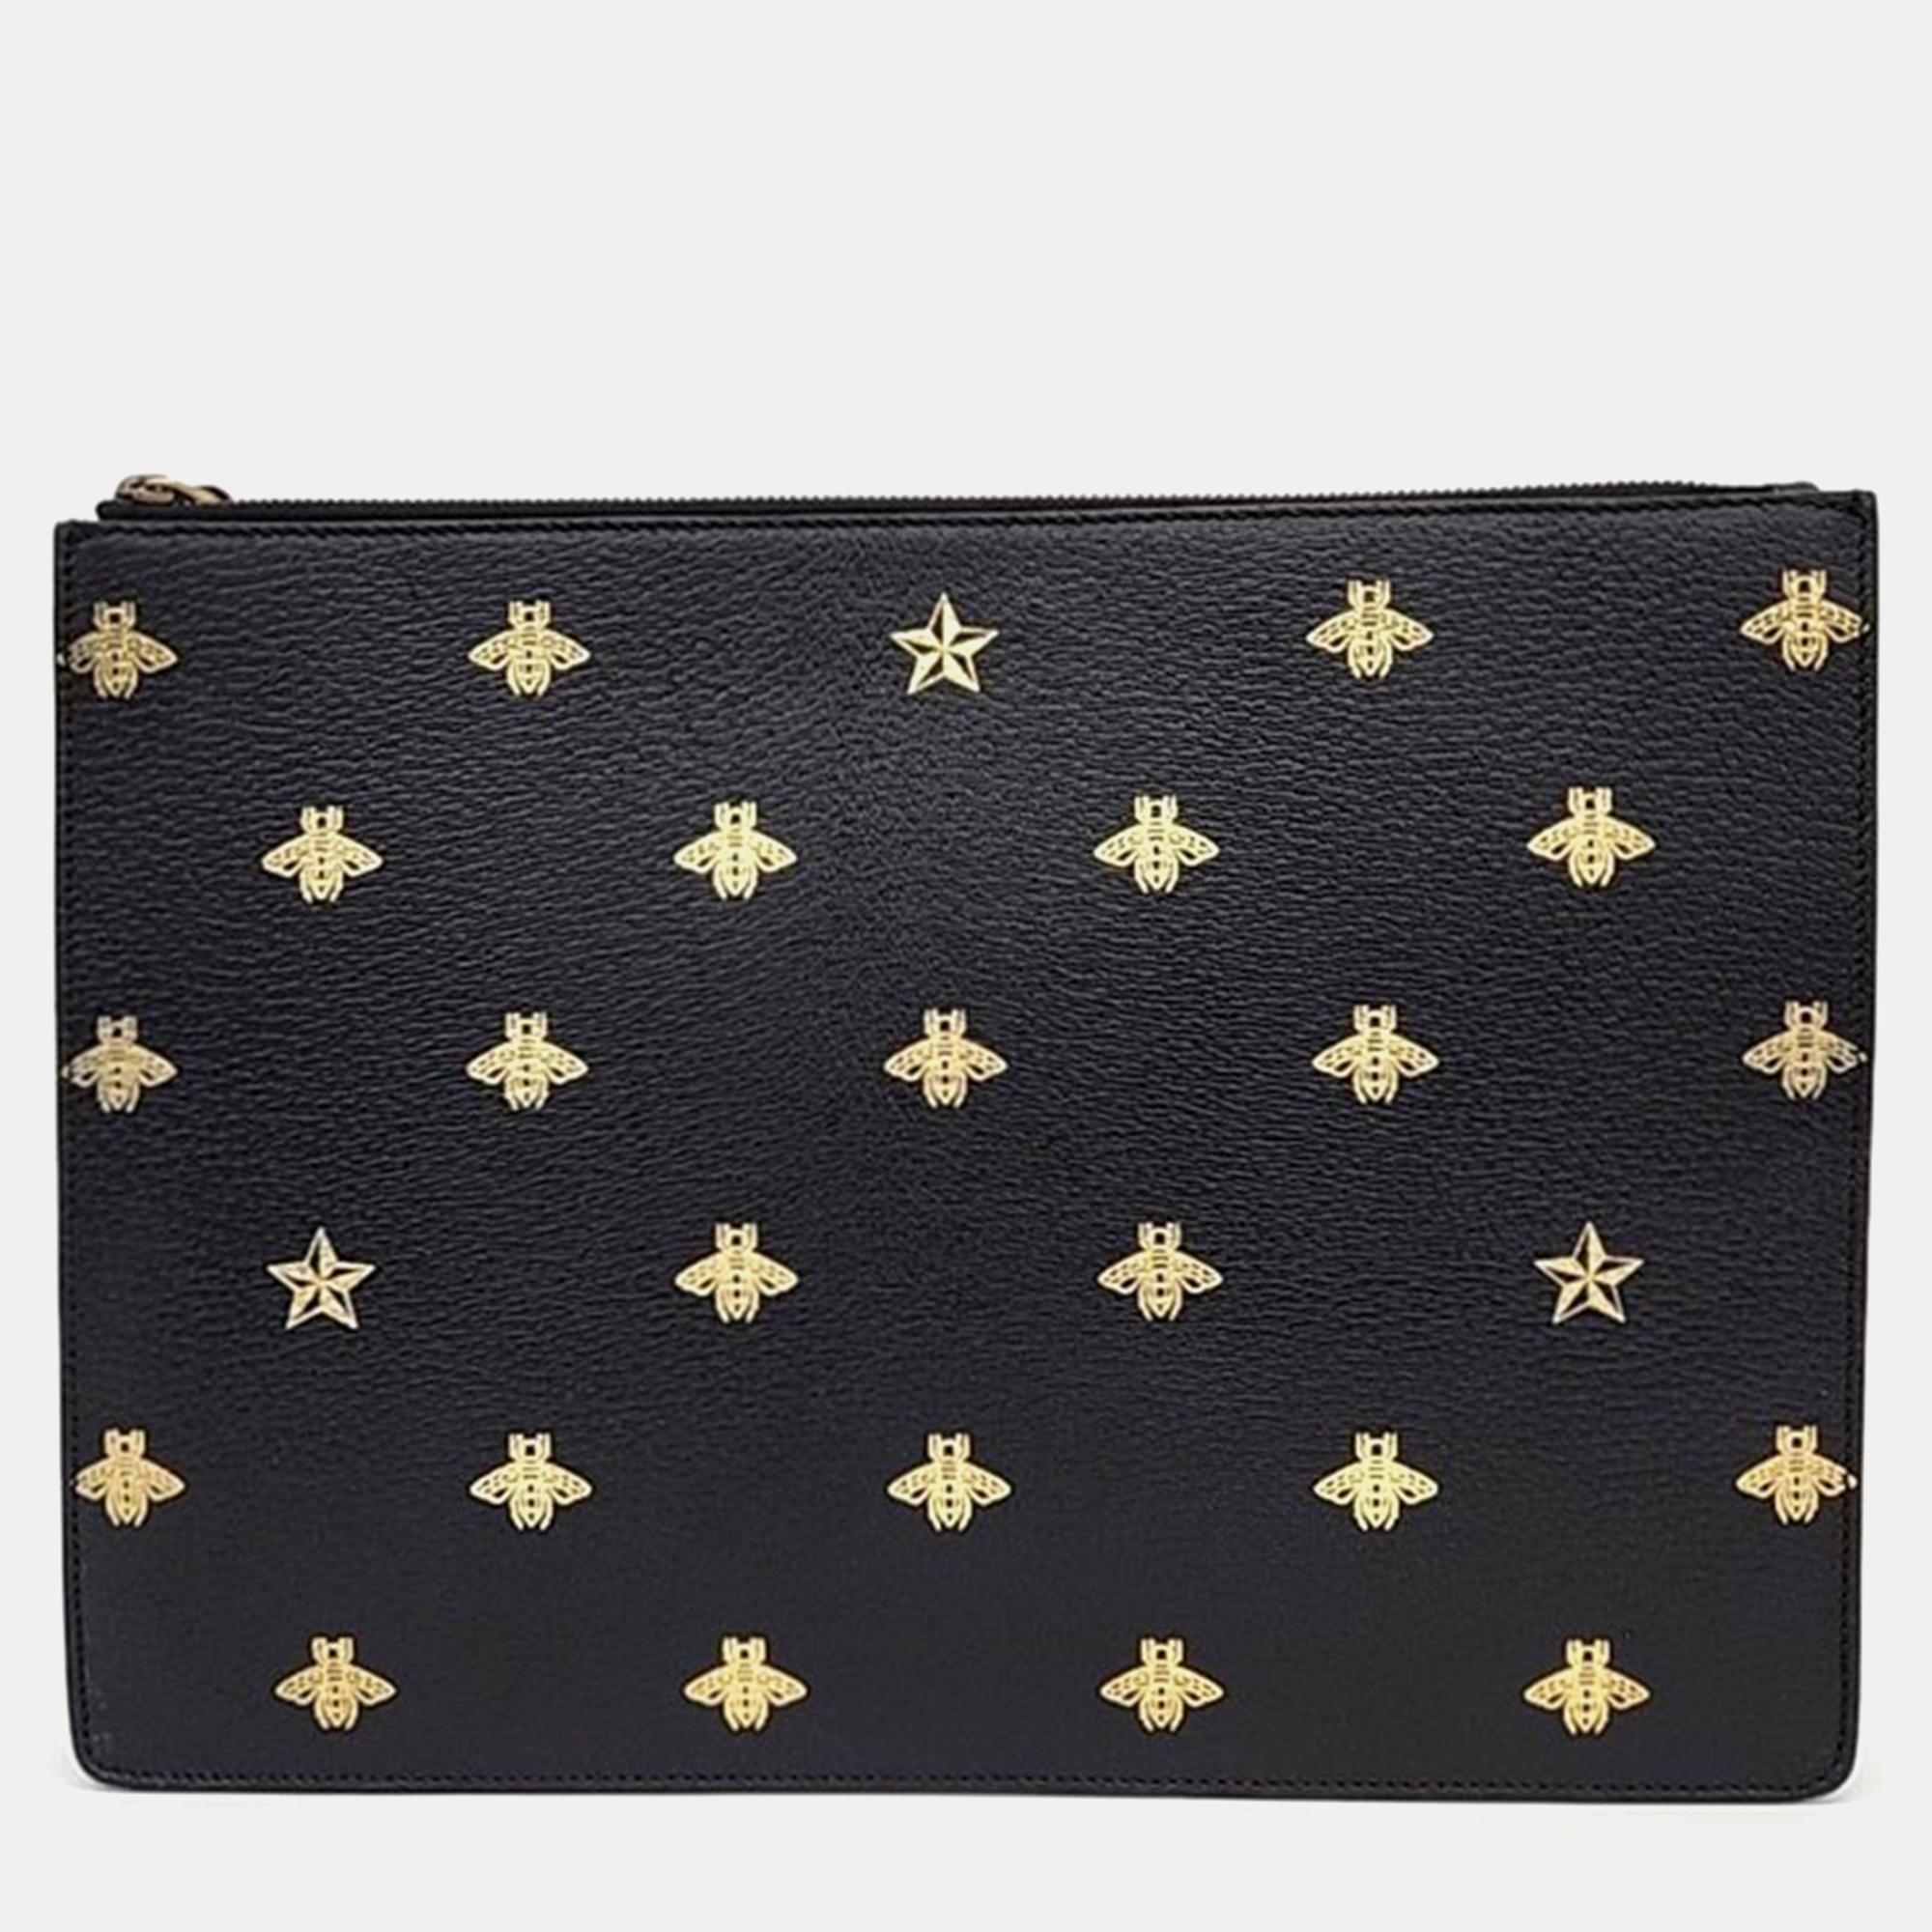 Pre-owned Gucci Black Leather Bee Star Clutch